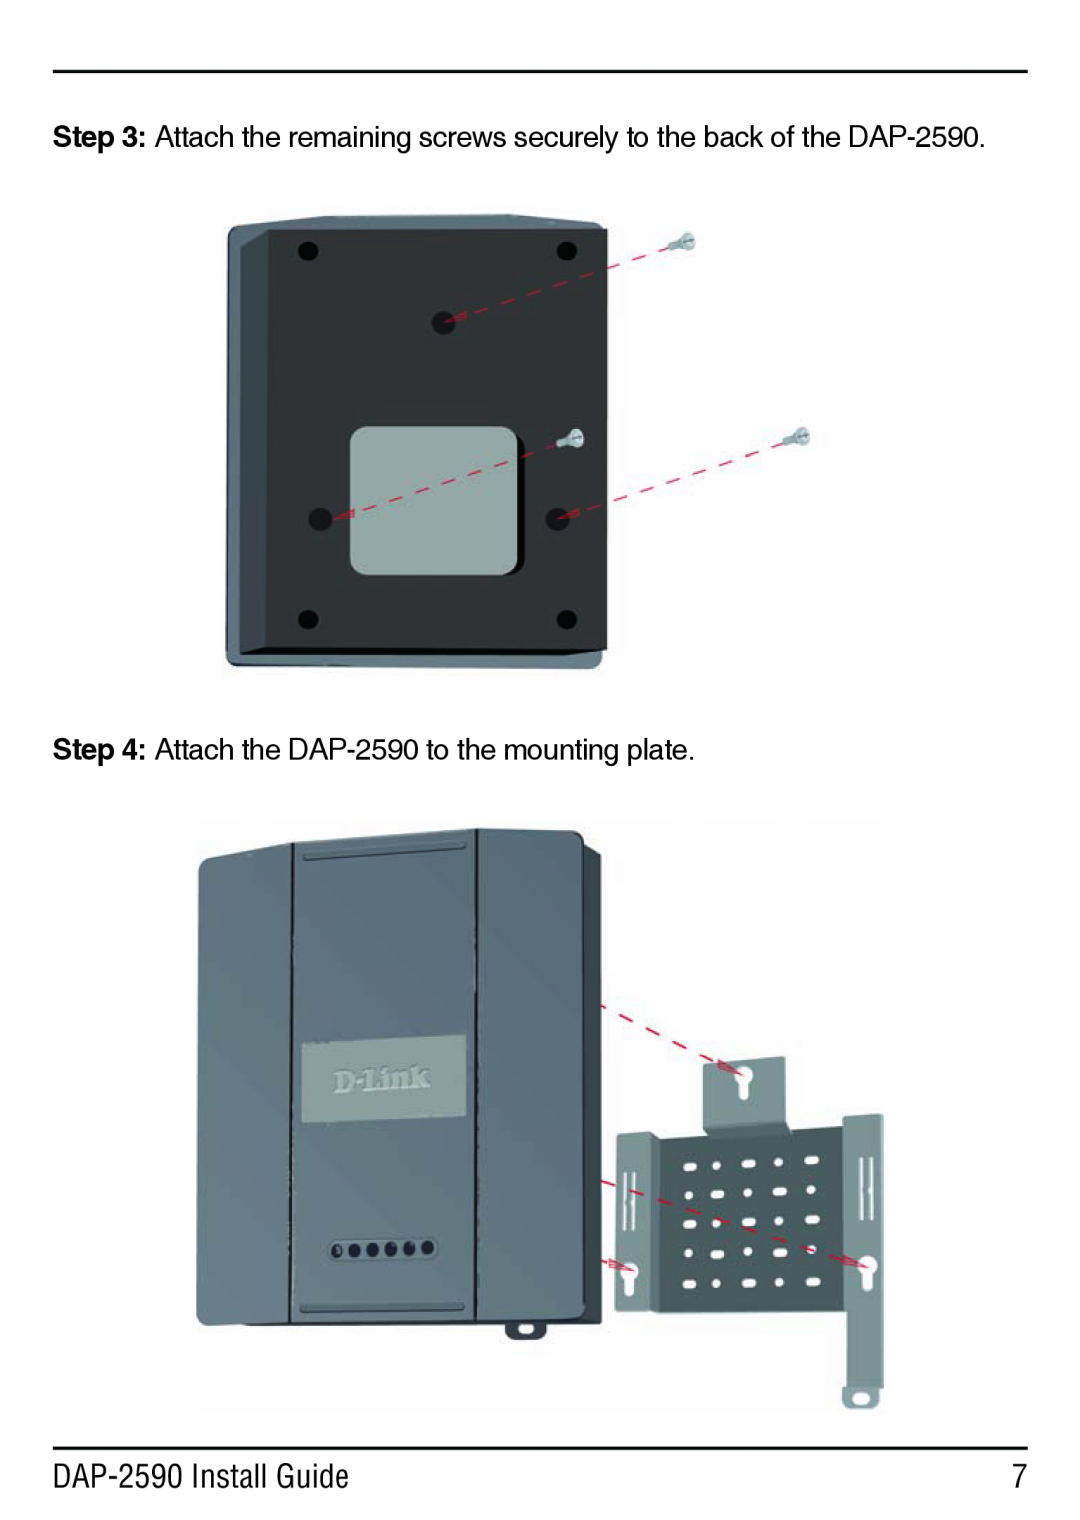 D-Link manual DAP-2590 Install Guide, Attach the DAP-2590 to the mounting plate 